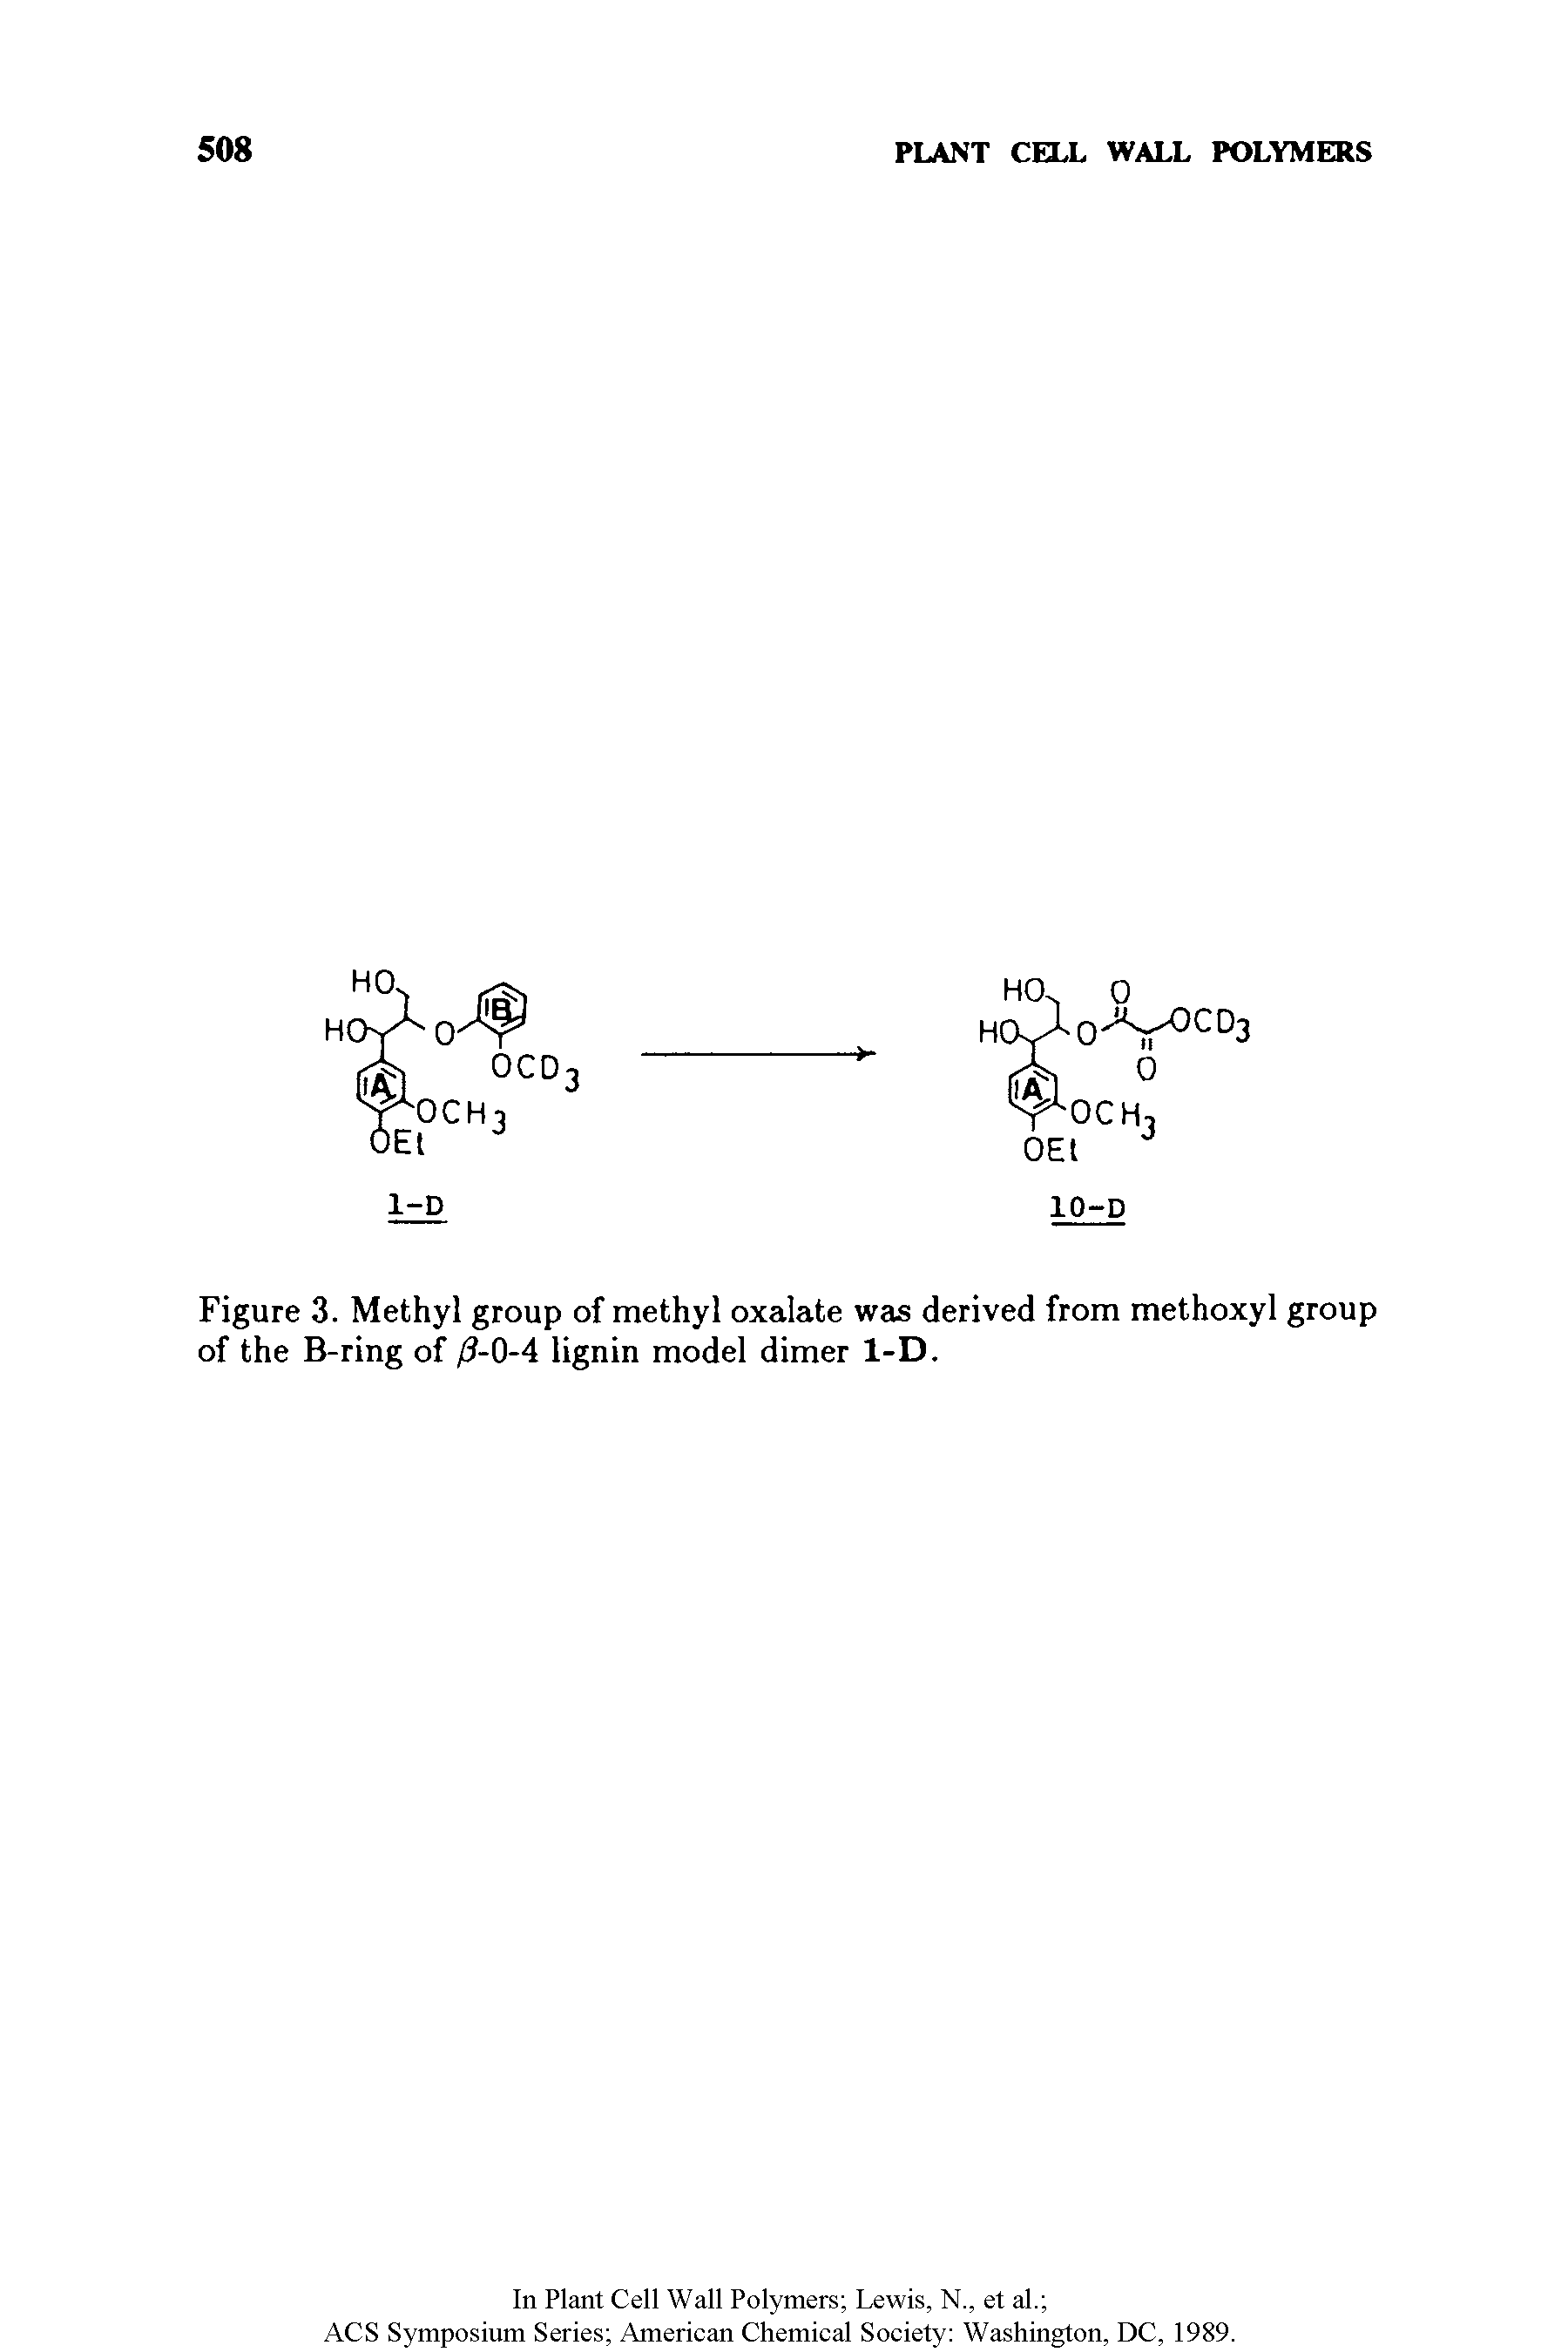 Figure 3. Methyl group of methyl oxalate was derived from methoxyl group of the B-ring of >3-0-4 lignin model dimer 1-D.